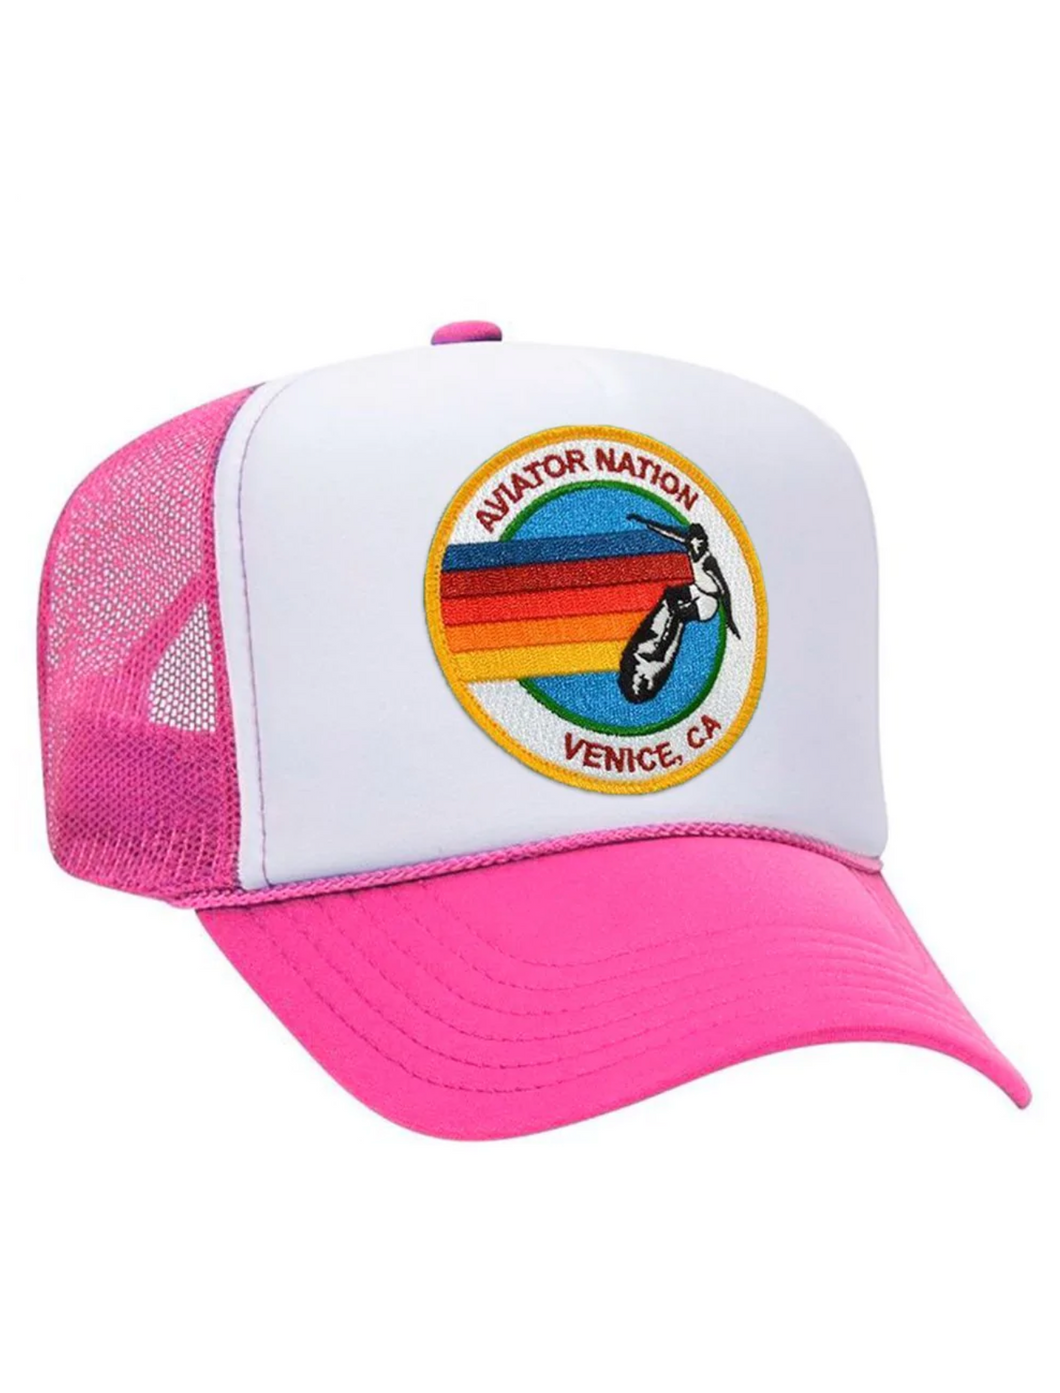 Aviator Nation Signature Vintage Low Rise Trucker Hat in Neon Pink/White